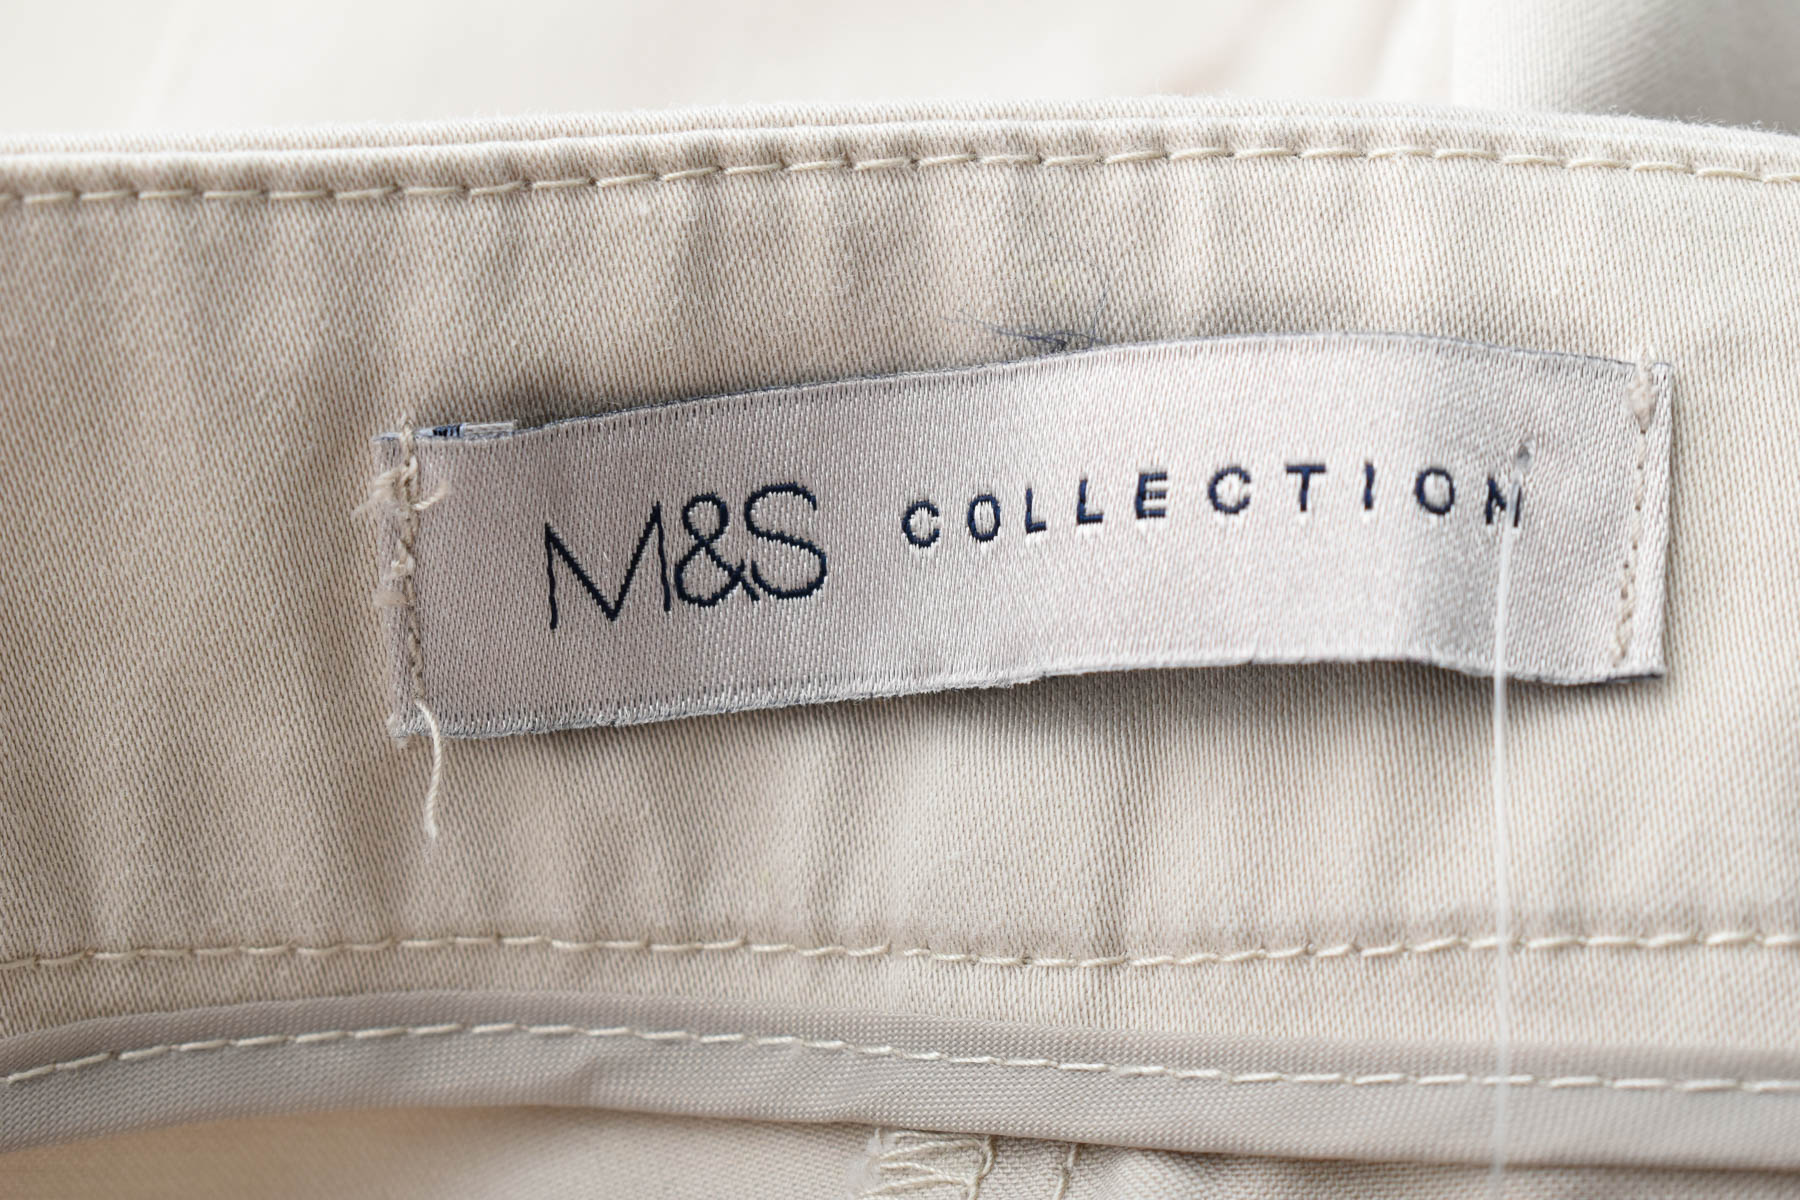 Women's trousers - M&S COLLECTION - 2